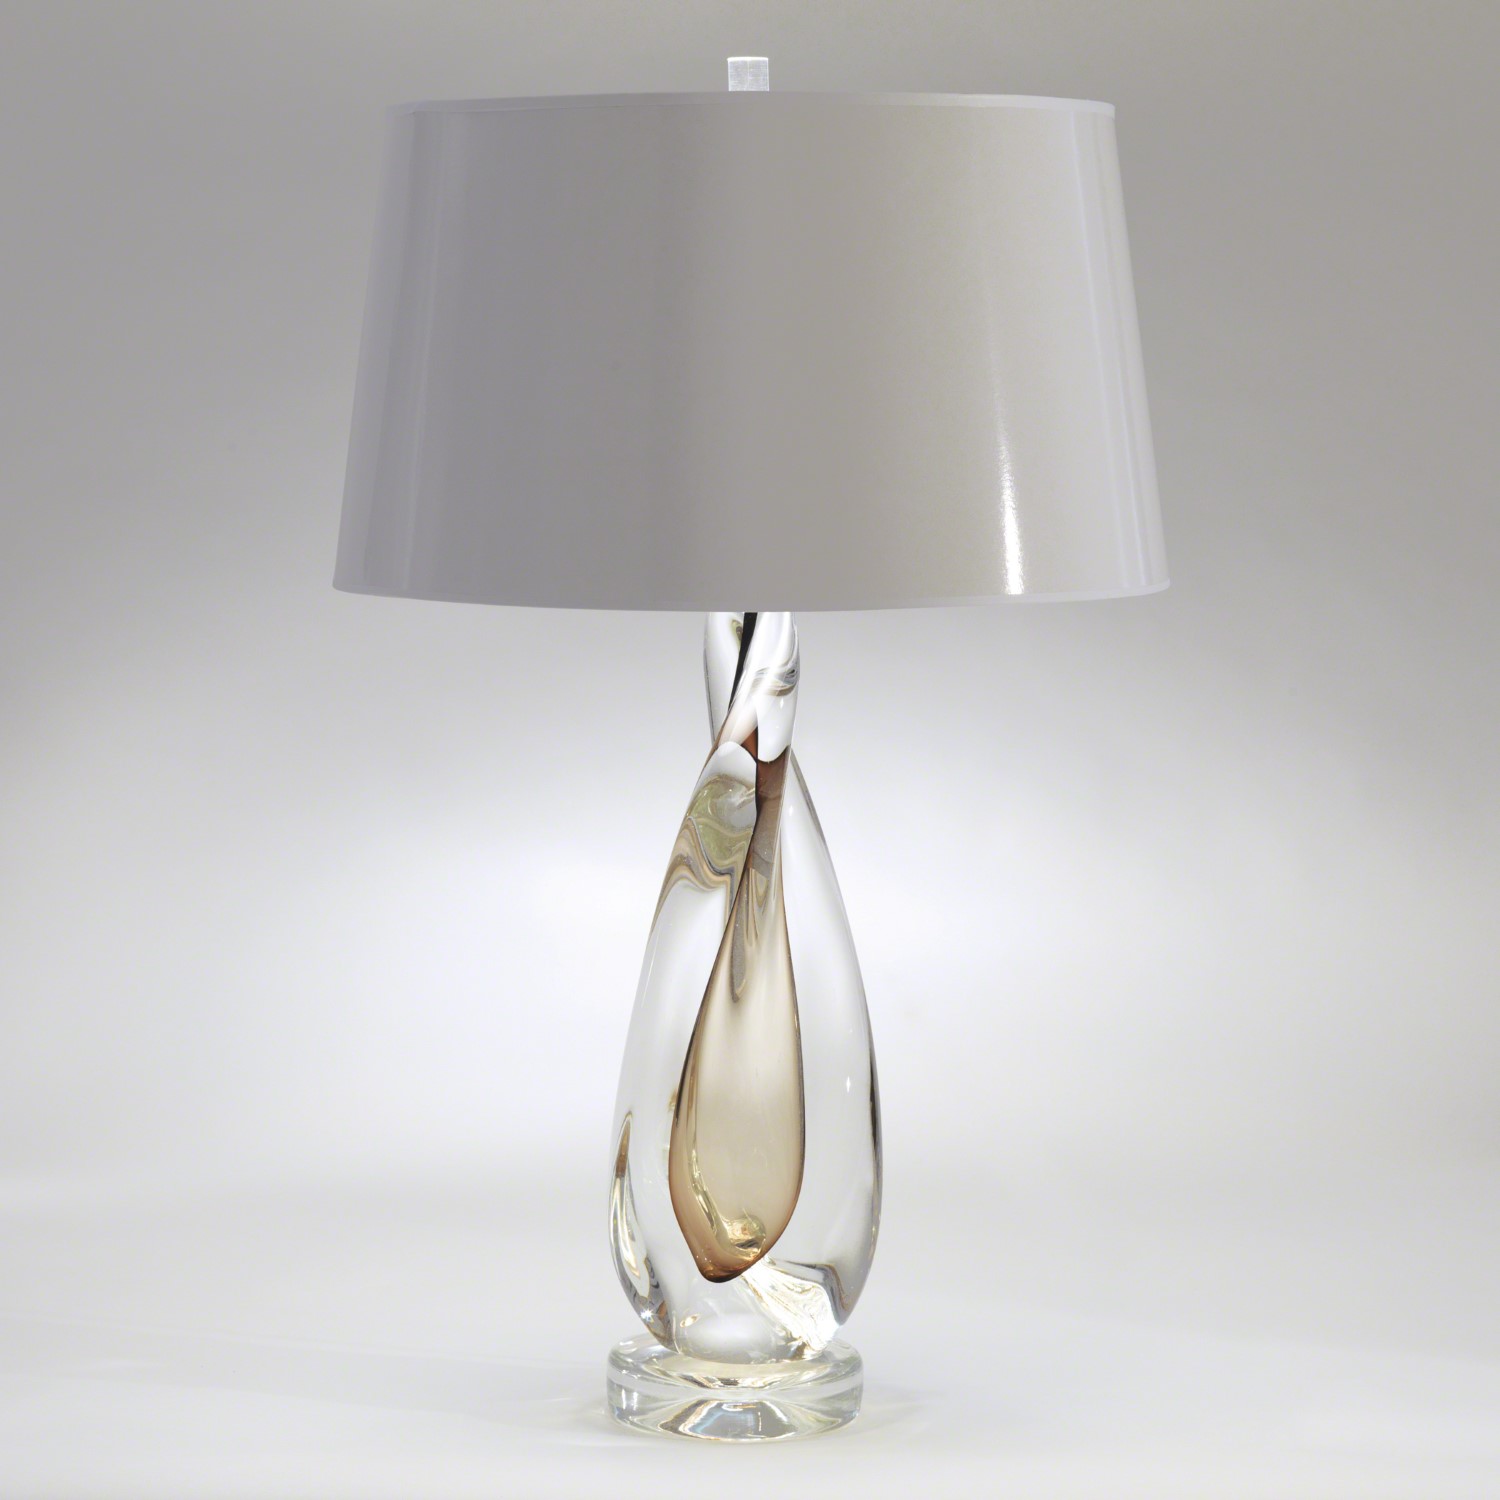 Amber Twisted Art Glass Lamps, Twist Table Lamp